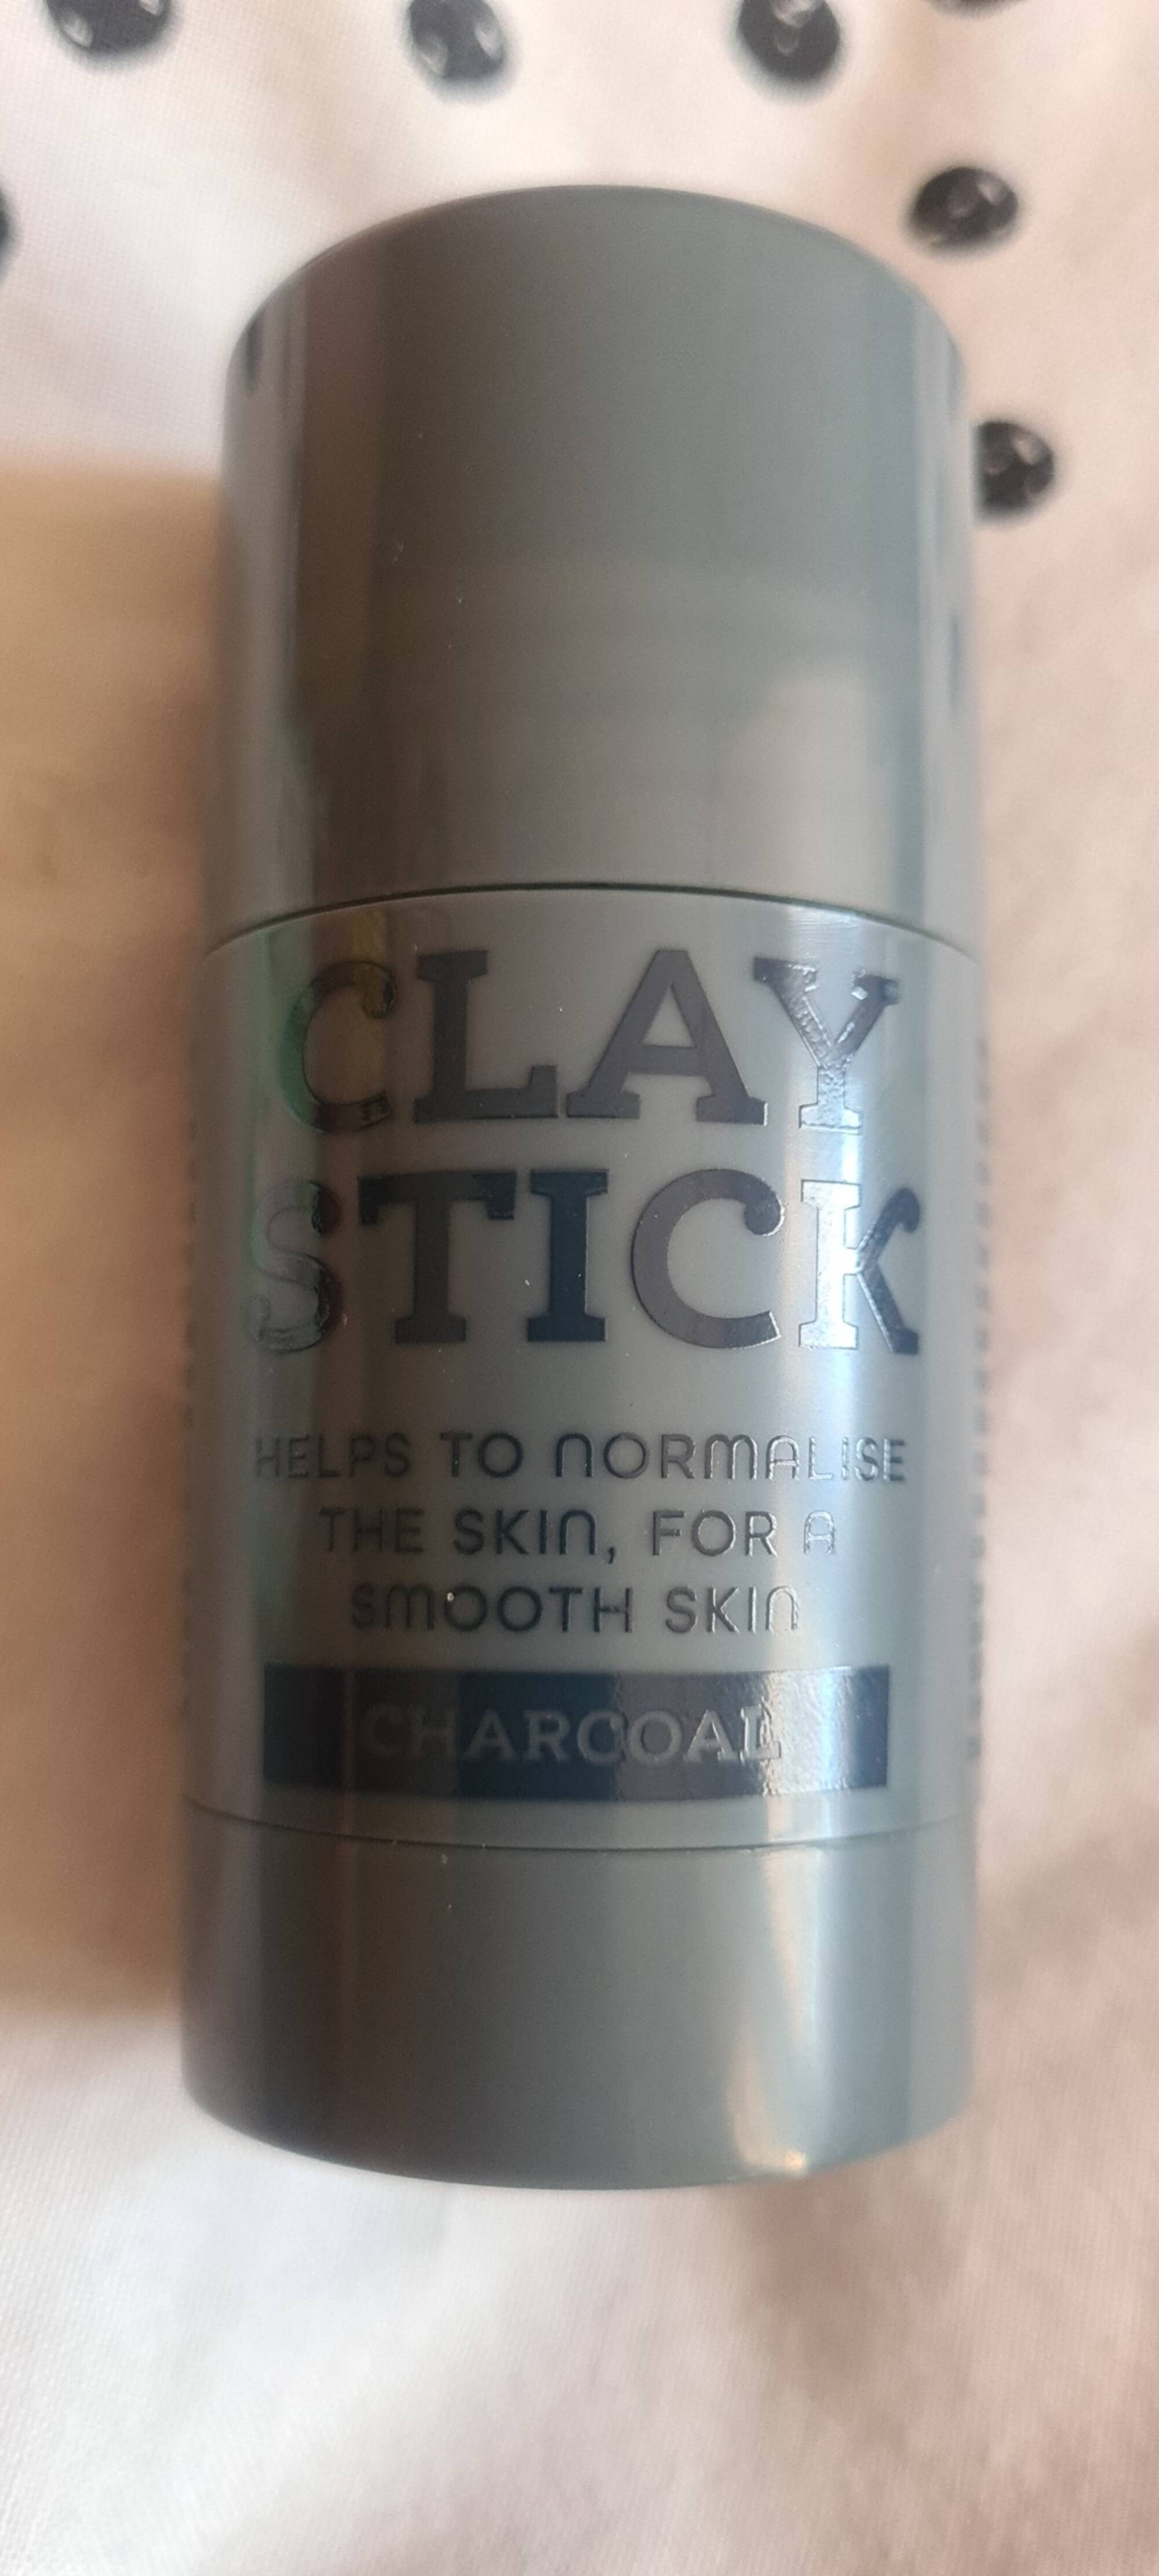 SKINBLISS - Clay stick - Face mask charcoal